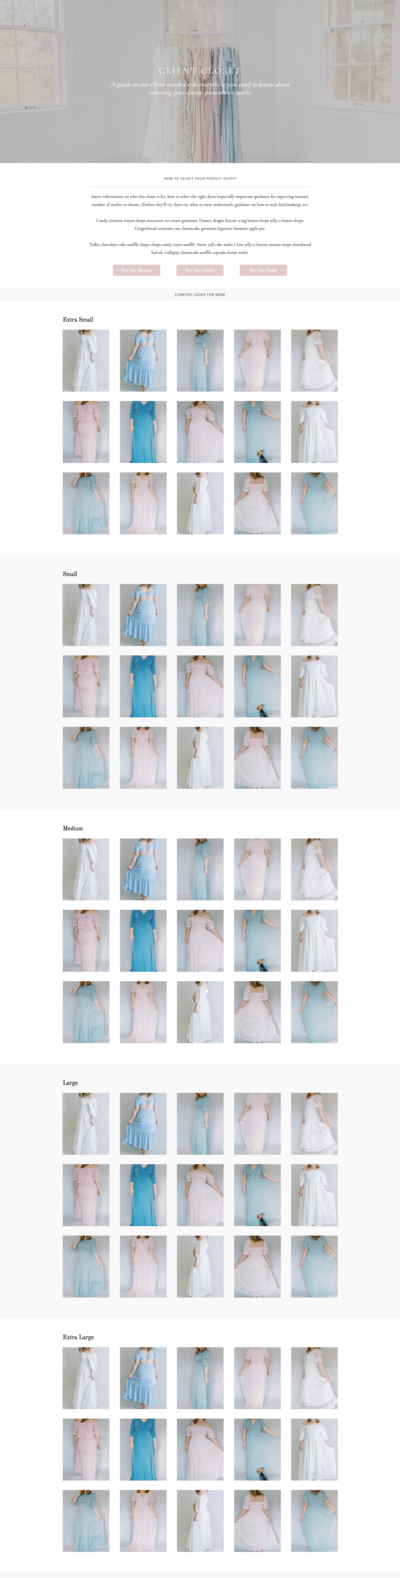 The Showit Client Closet template for photographers and creatives.